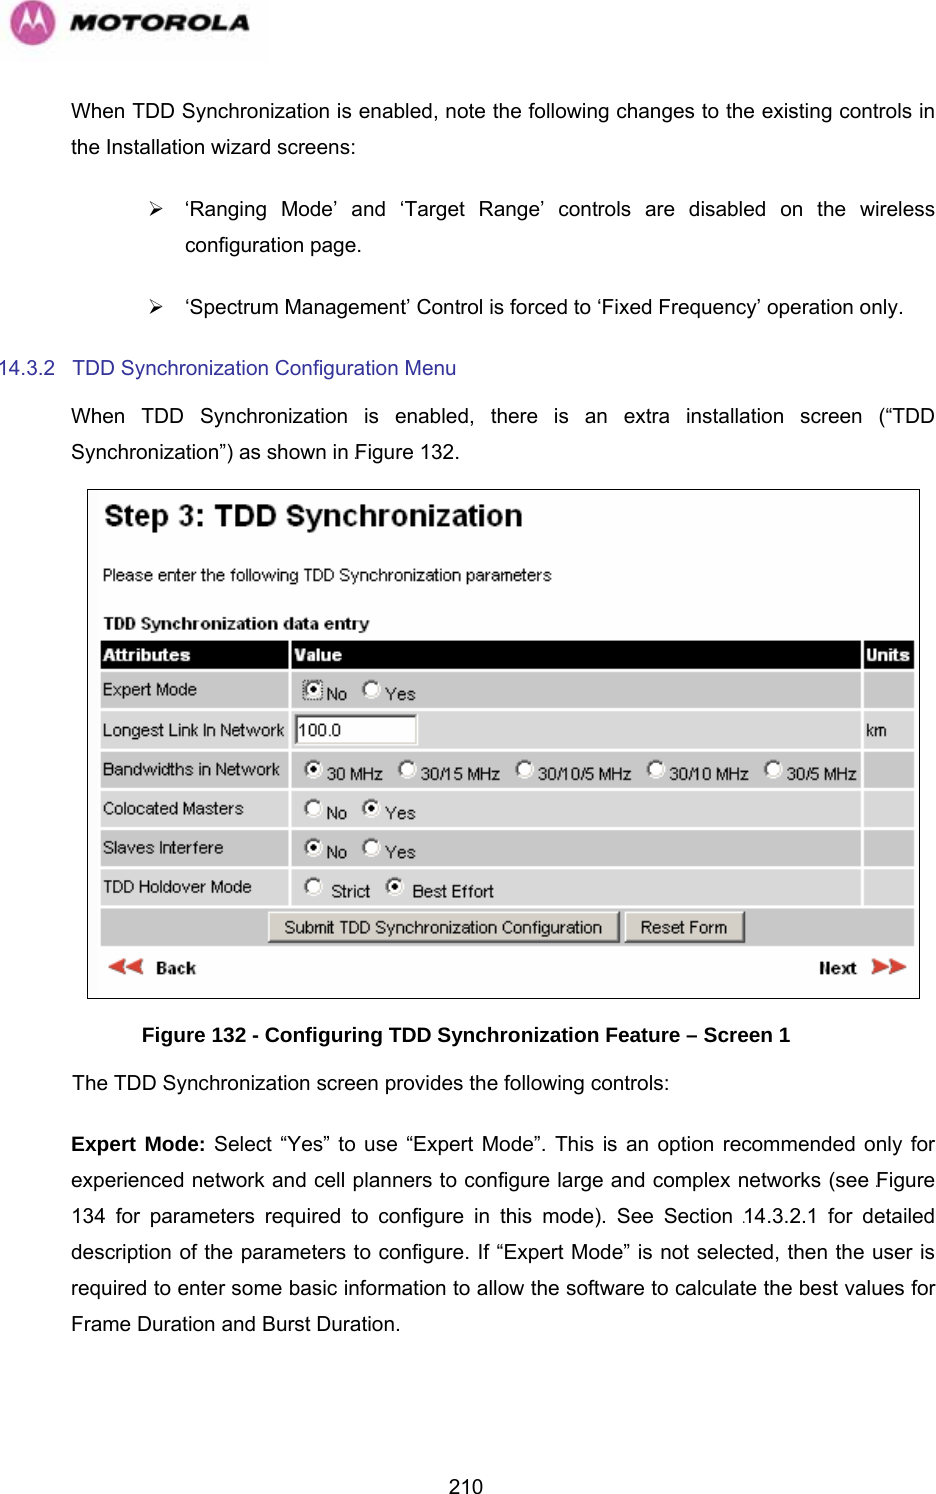   210When TDD Synchronization is enabled, note the following changes to the existing controls in the Installation wizard screens: ¾  ‘Ranging Mode’ and ‘Target Range’ controls are disabled on the wireless configuration page. ¾  ‘Spectrum Management’ Control is forced to ‘Fixed Frequency’ operation only. 14.3.2 TDD Synchronization Configuration Menu When TDD Synchronization is enabled, there is an extra installation screen (“TDD Synchronization”) as shown in 1221HFigure 132.  Figure 132 - Configuring TDD Synchronization Feature – Screen 1 The TDD Synchronization screen provides the following controls: Expert Mode: Select “Yes” to use “Expert Mode”. This is an option recommended only for experienced network and cell planners to configure large and complex networks (see 1222HFigure 134 for parameters required to configure in this mode). See Section 1223H14.3.2.1 for detailed description of the parameters to configure. If “Expert Mode” is not selected, then the user is required to enter some basic information to allow the software to calculate the best values for Frame Duration and Burst Duration.   